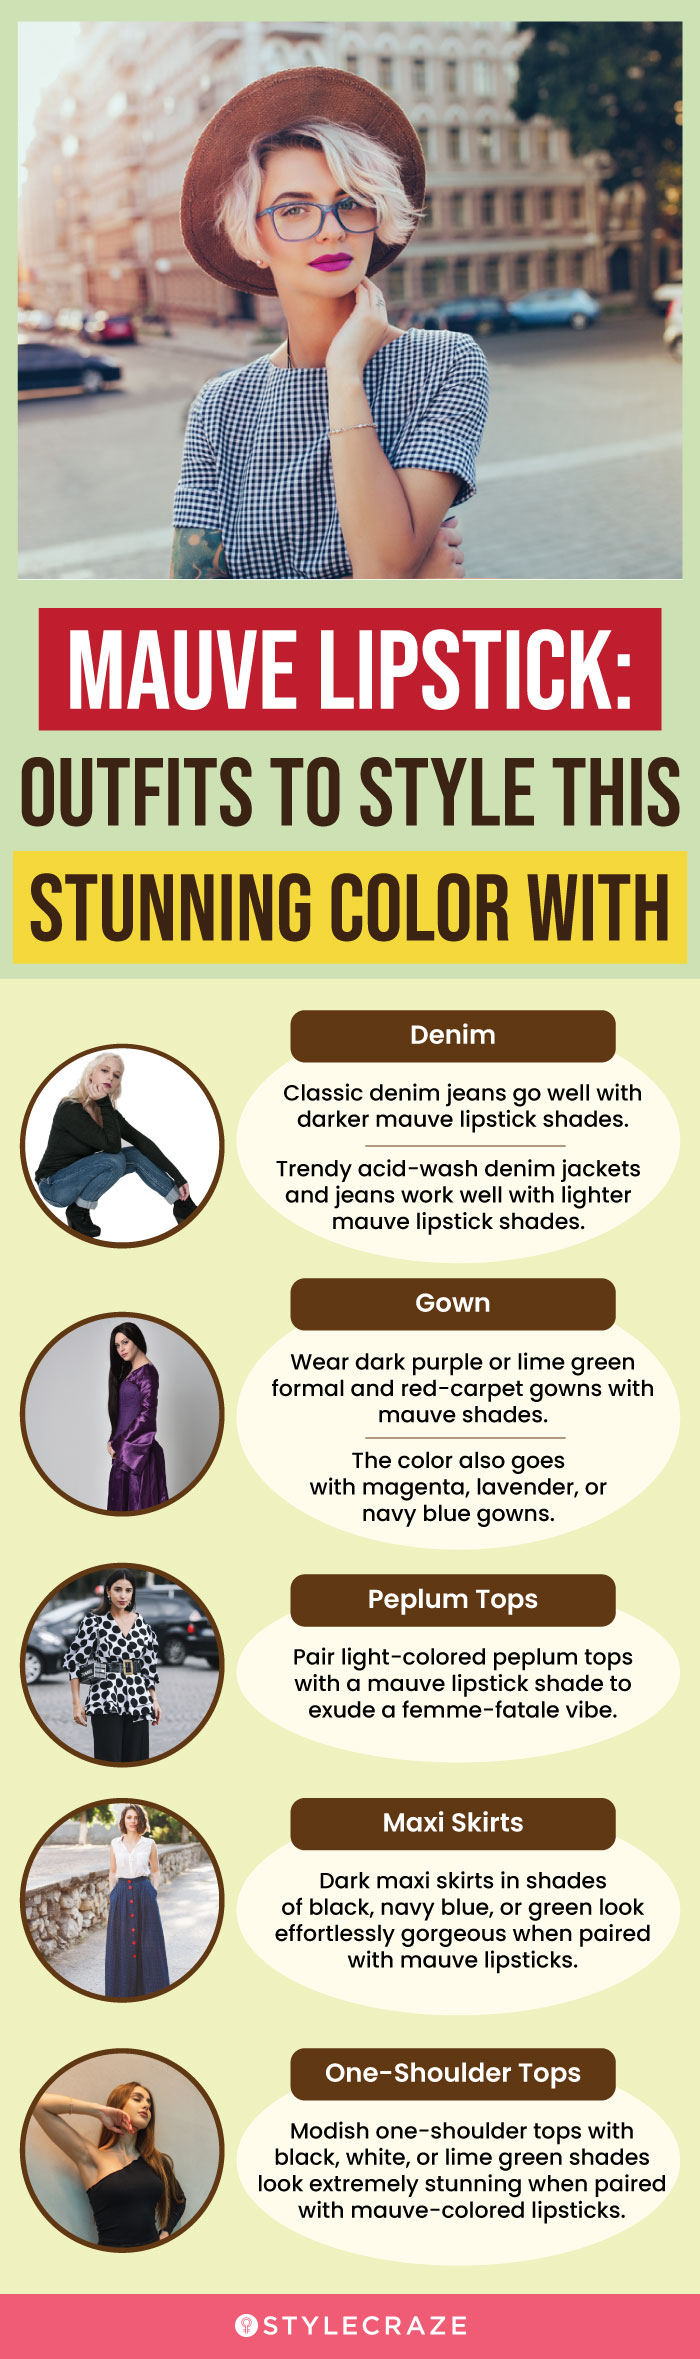 Mauve Lipstick: Outfits To Style This Stunning Color With (infographic)